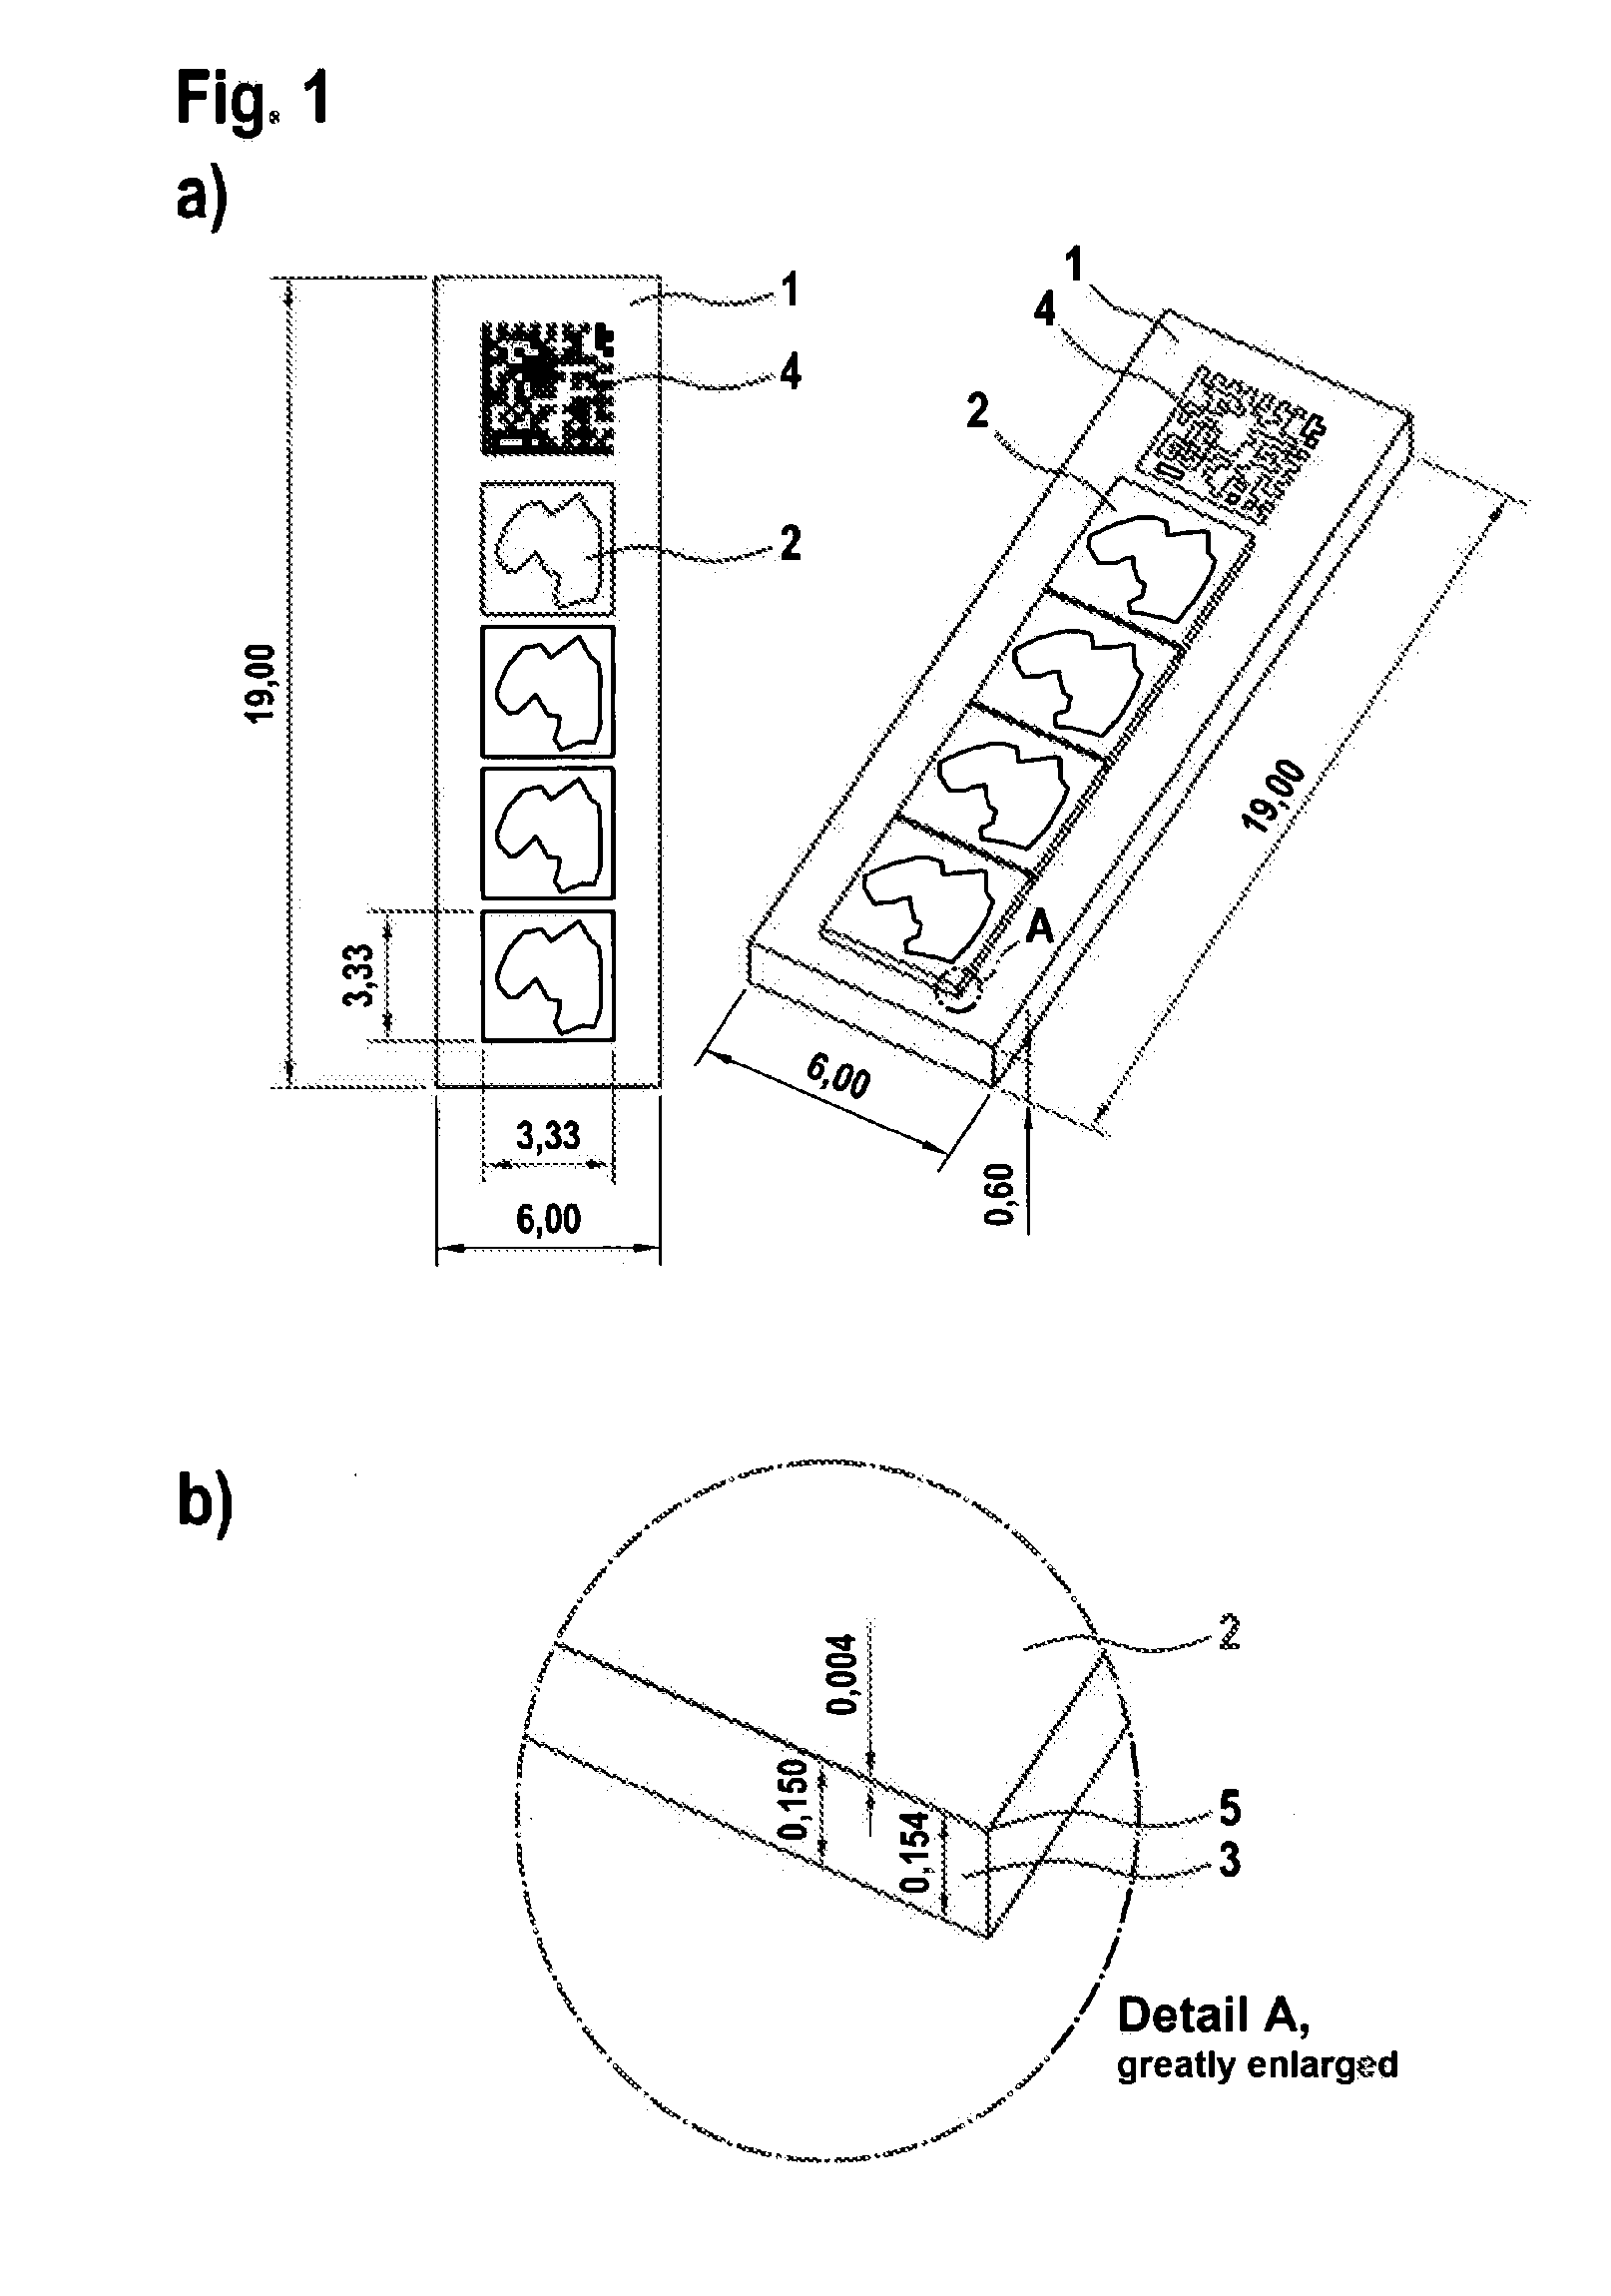 Method and analysis device for microscopic examination of a tissue section or cell smear